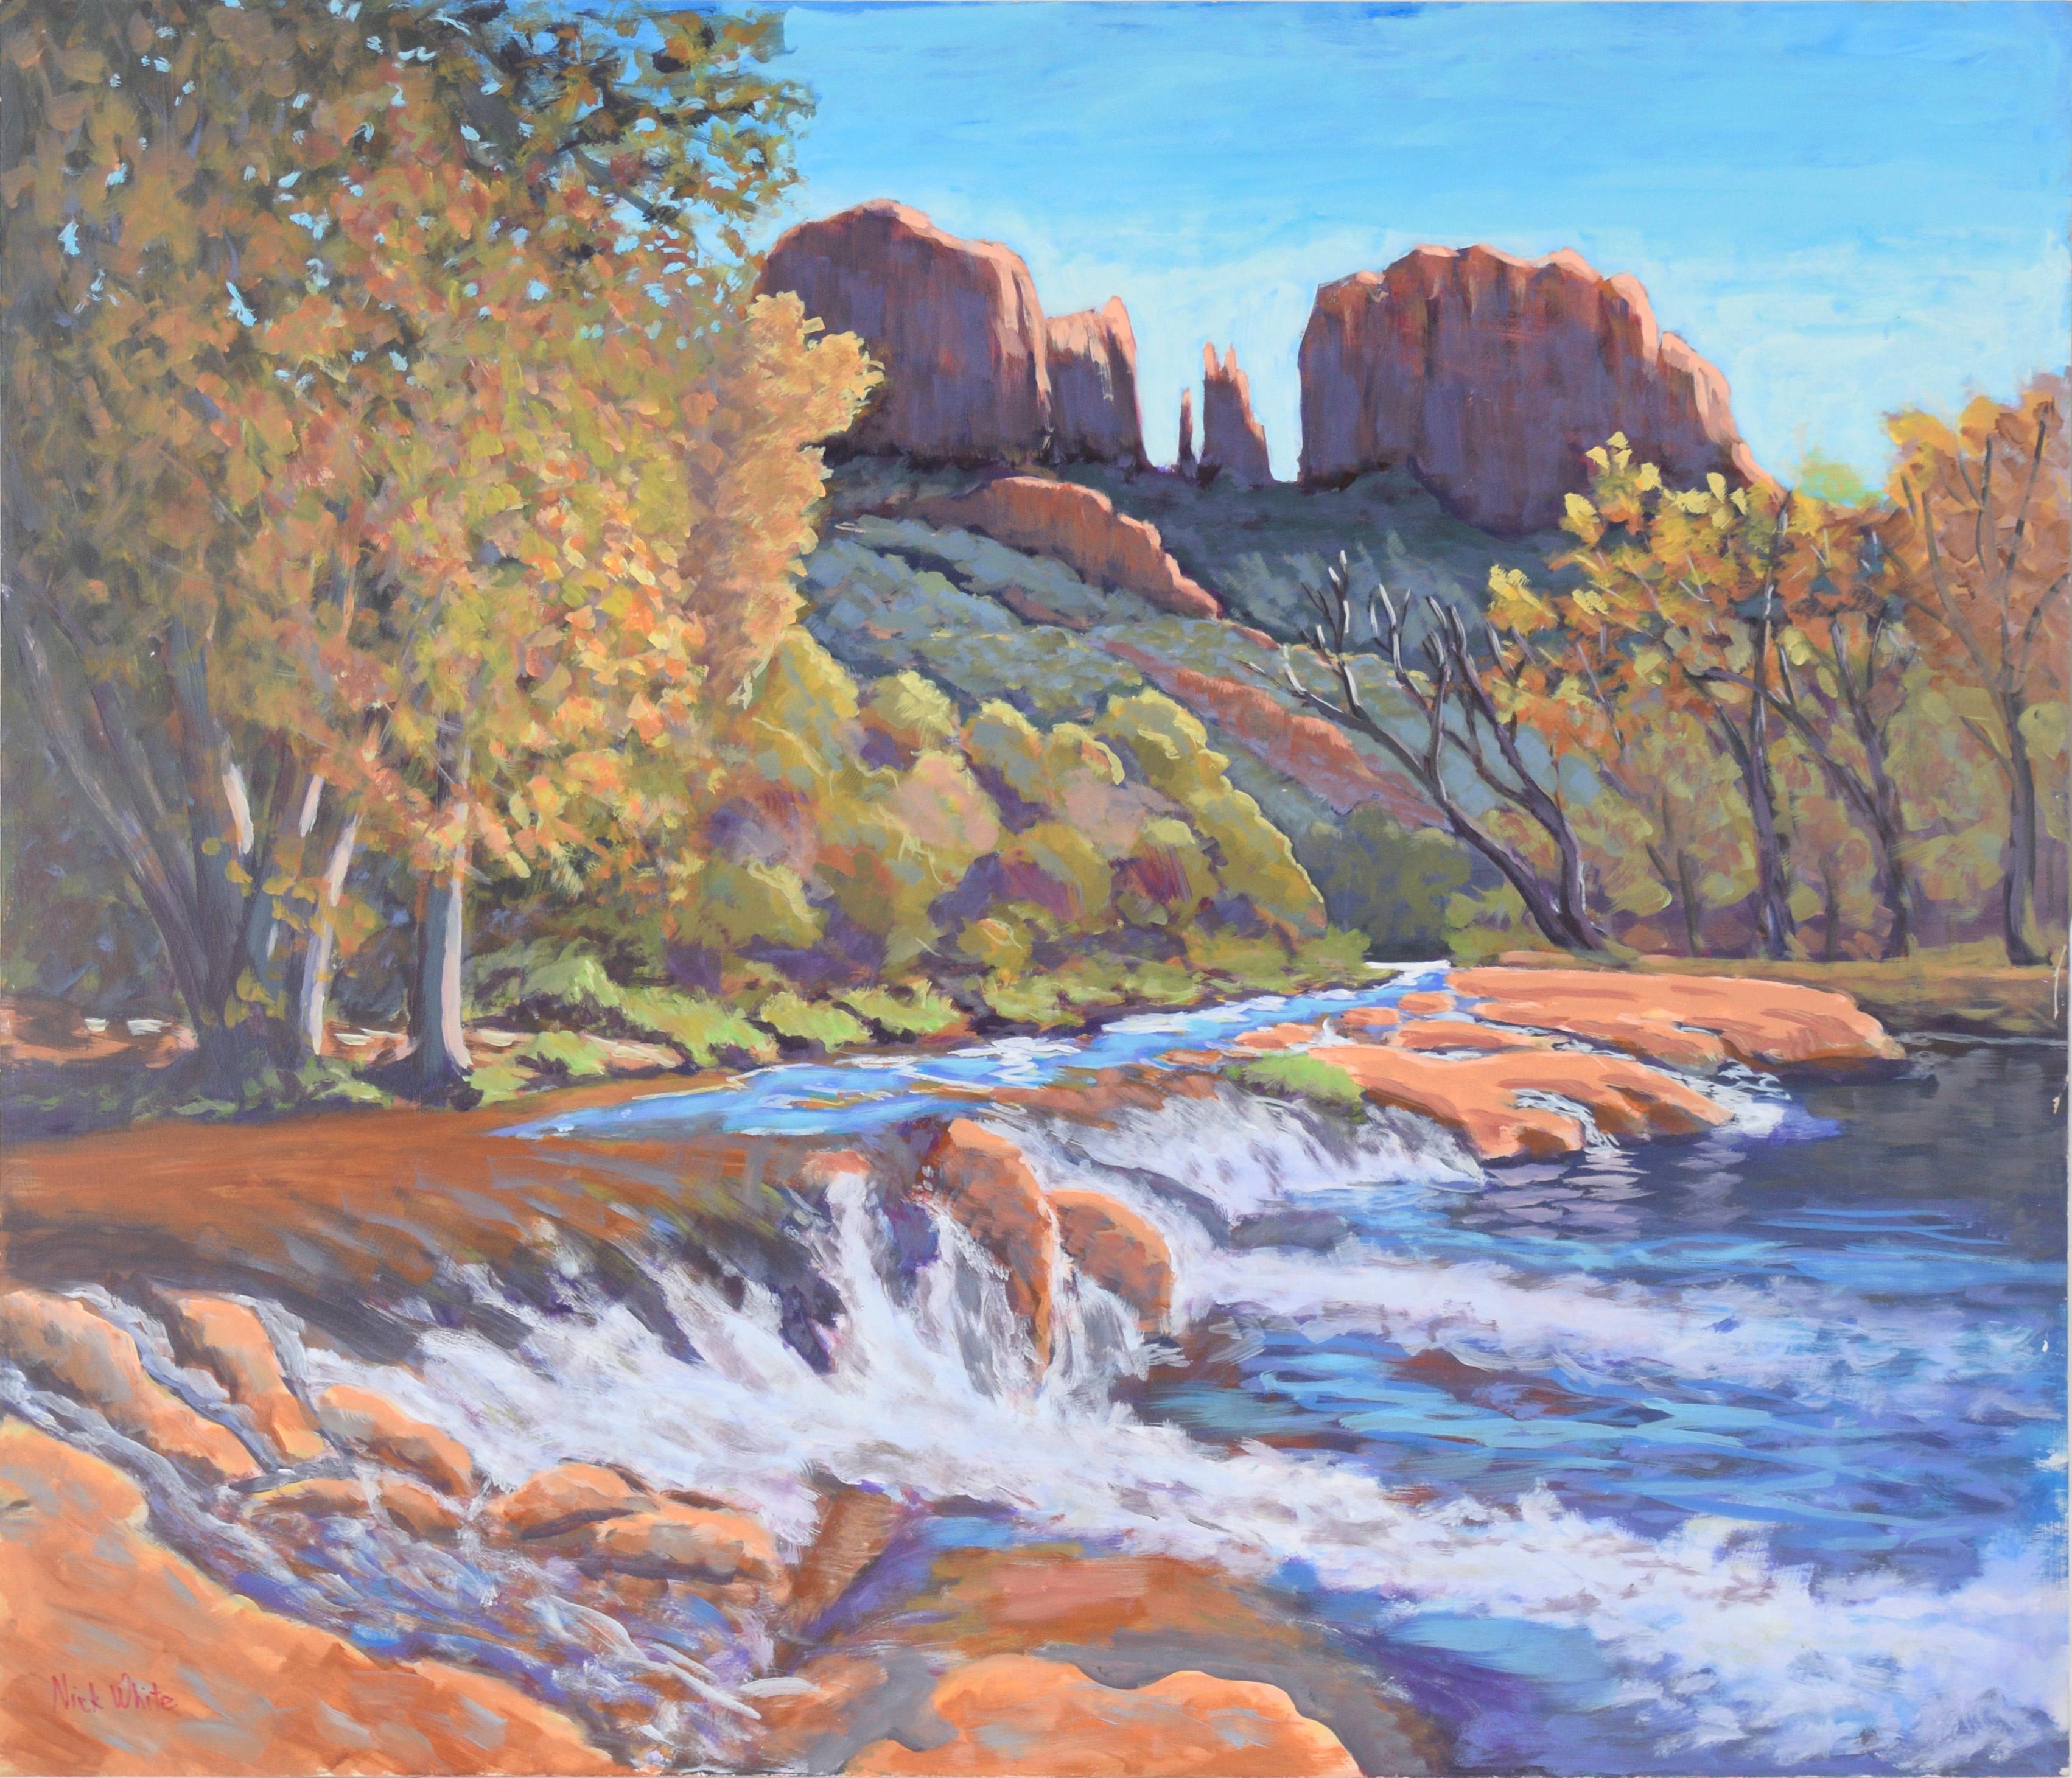 Nick White Landscape Painting - River in the Desert - Western Plein Aire Landscape in Acrylic on Board